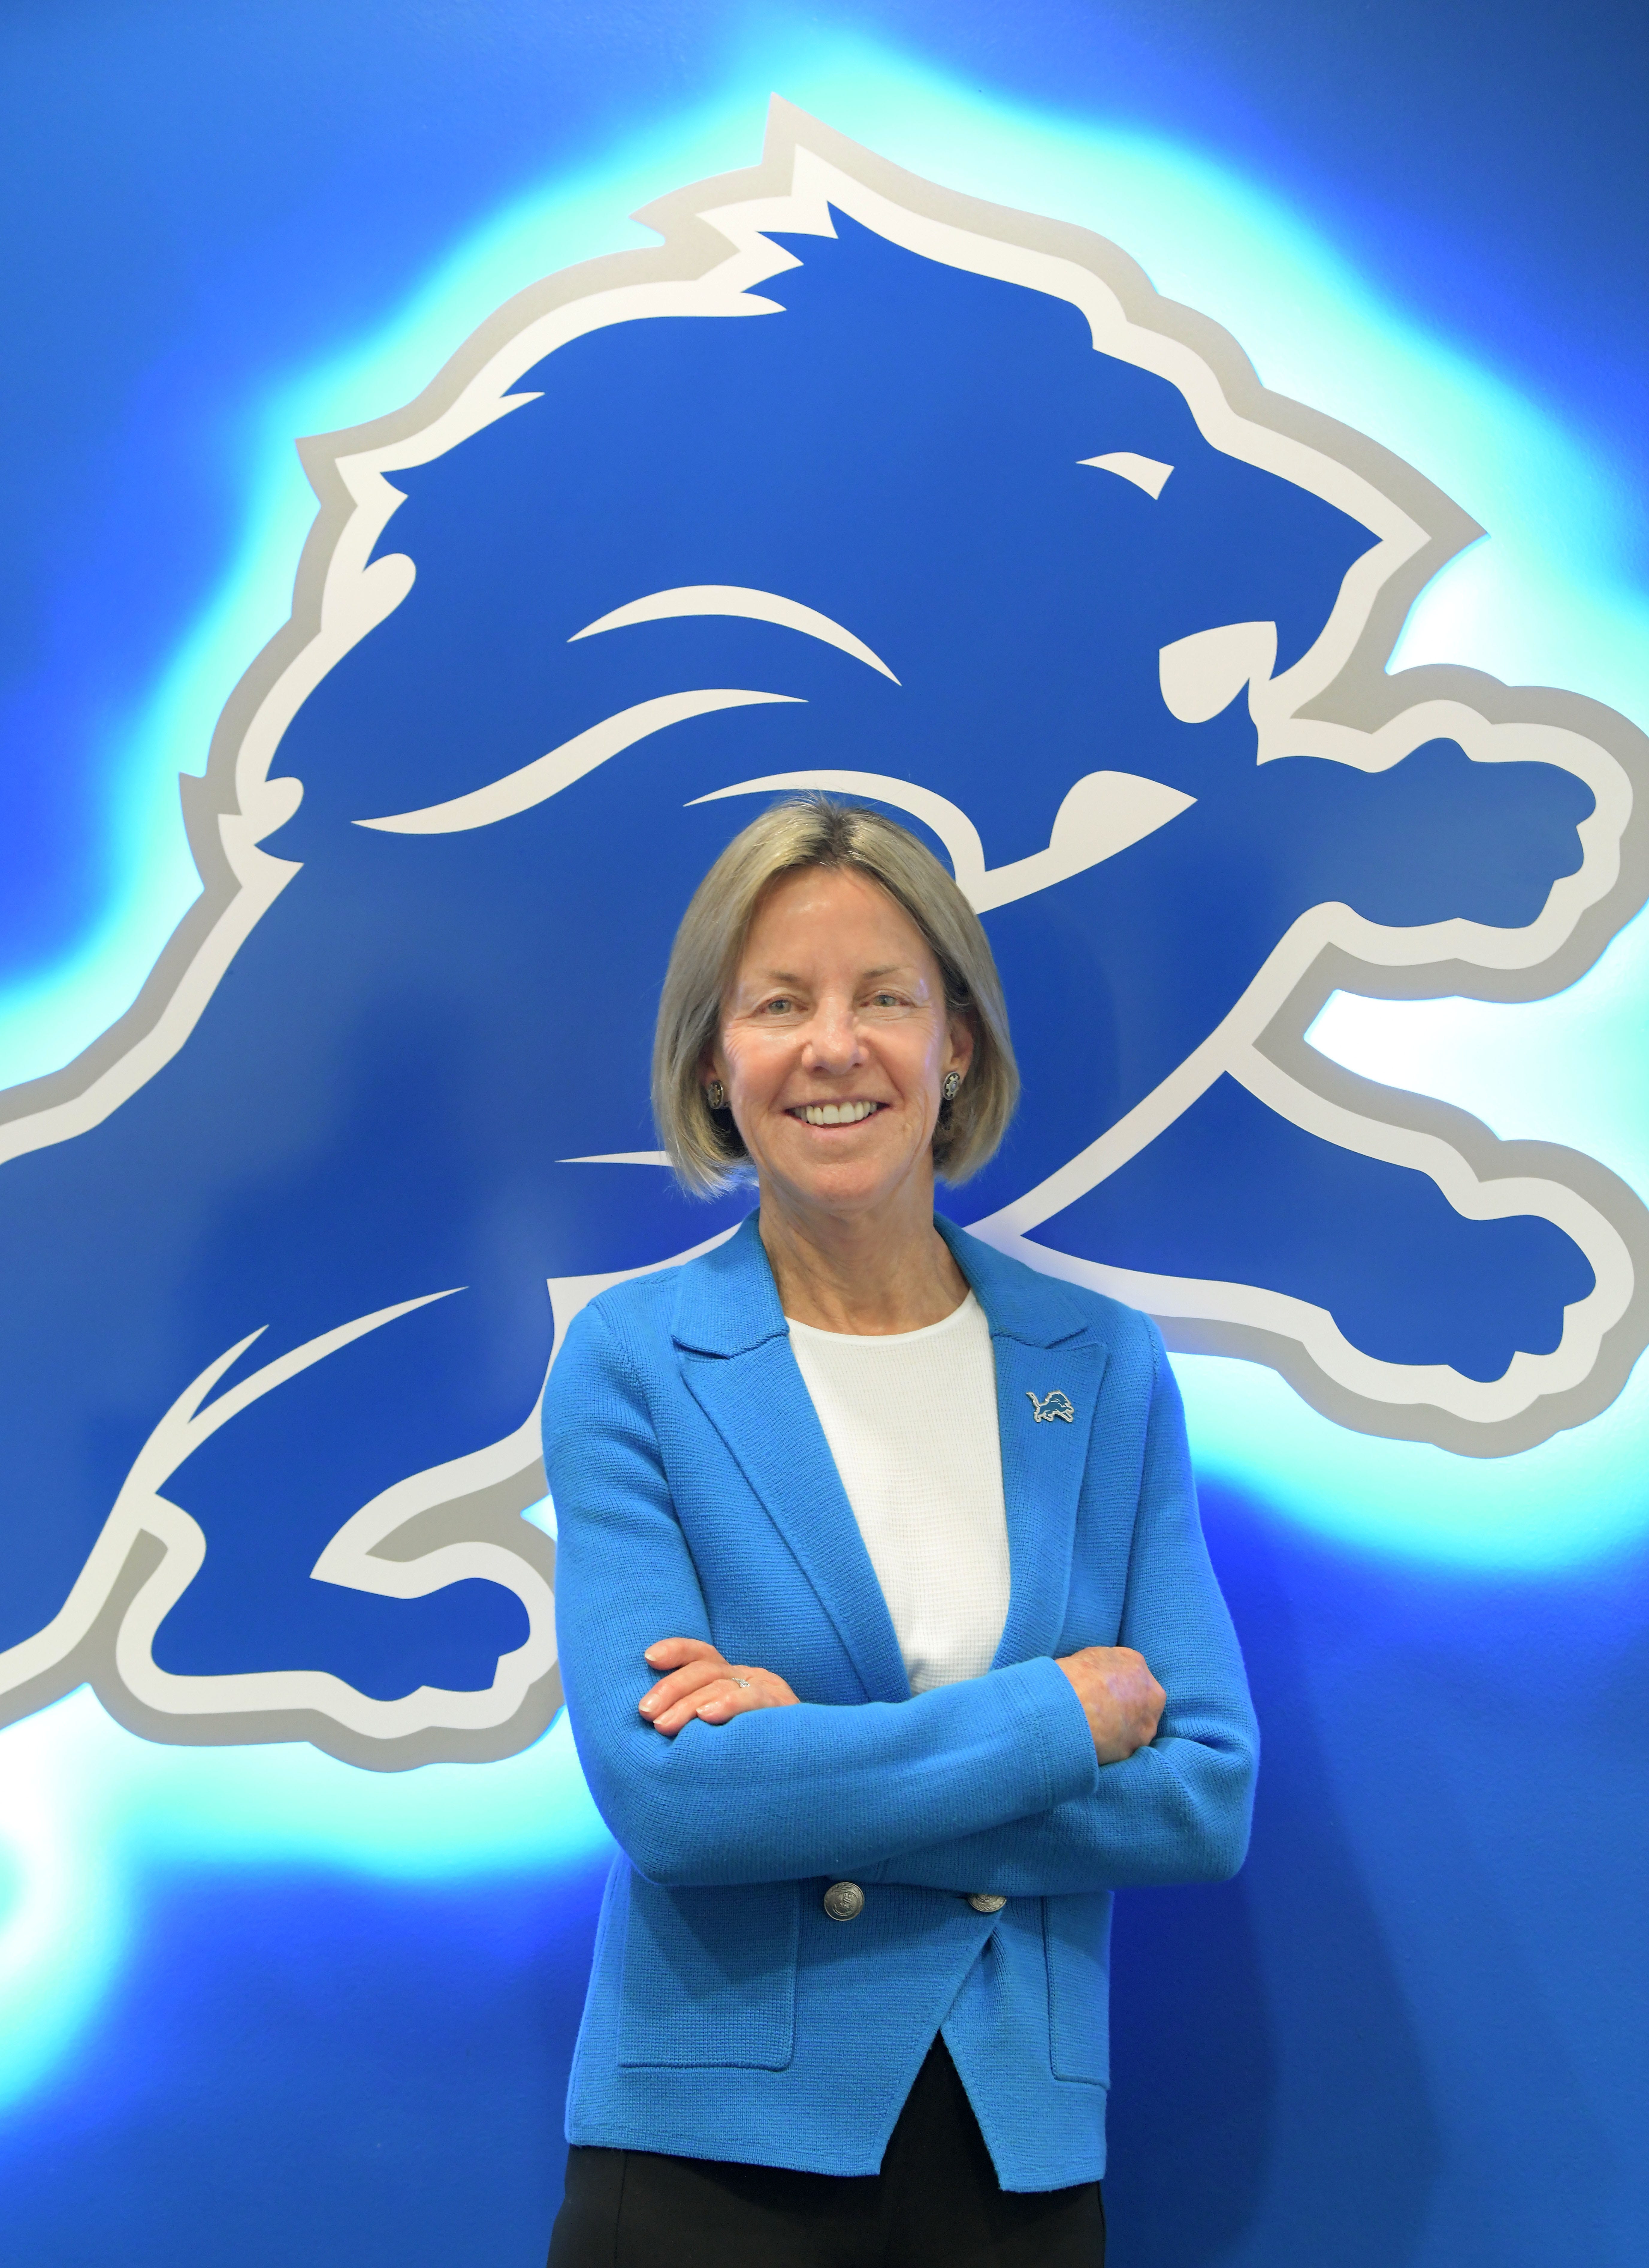 The Detroit Lions' principal owner, Sheila Hamp, considers herself 'a steward' of the NFL franchise her family has controlled since the mid-1960s: 'The team belongs to the city of Detroit, and Detroit is a football town, for sure.'